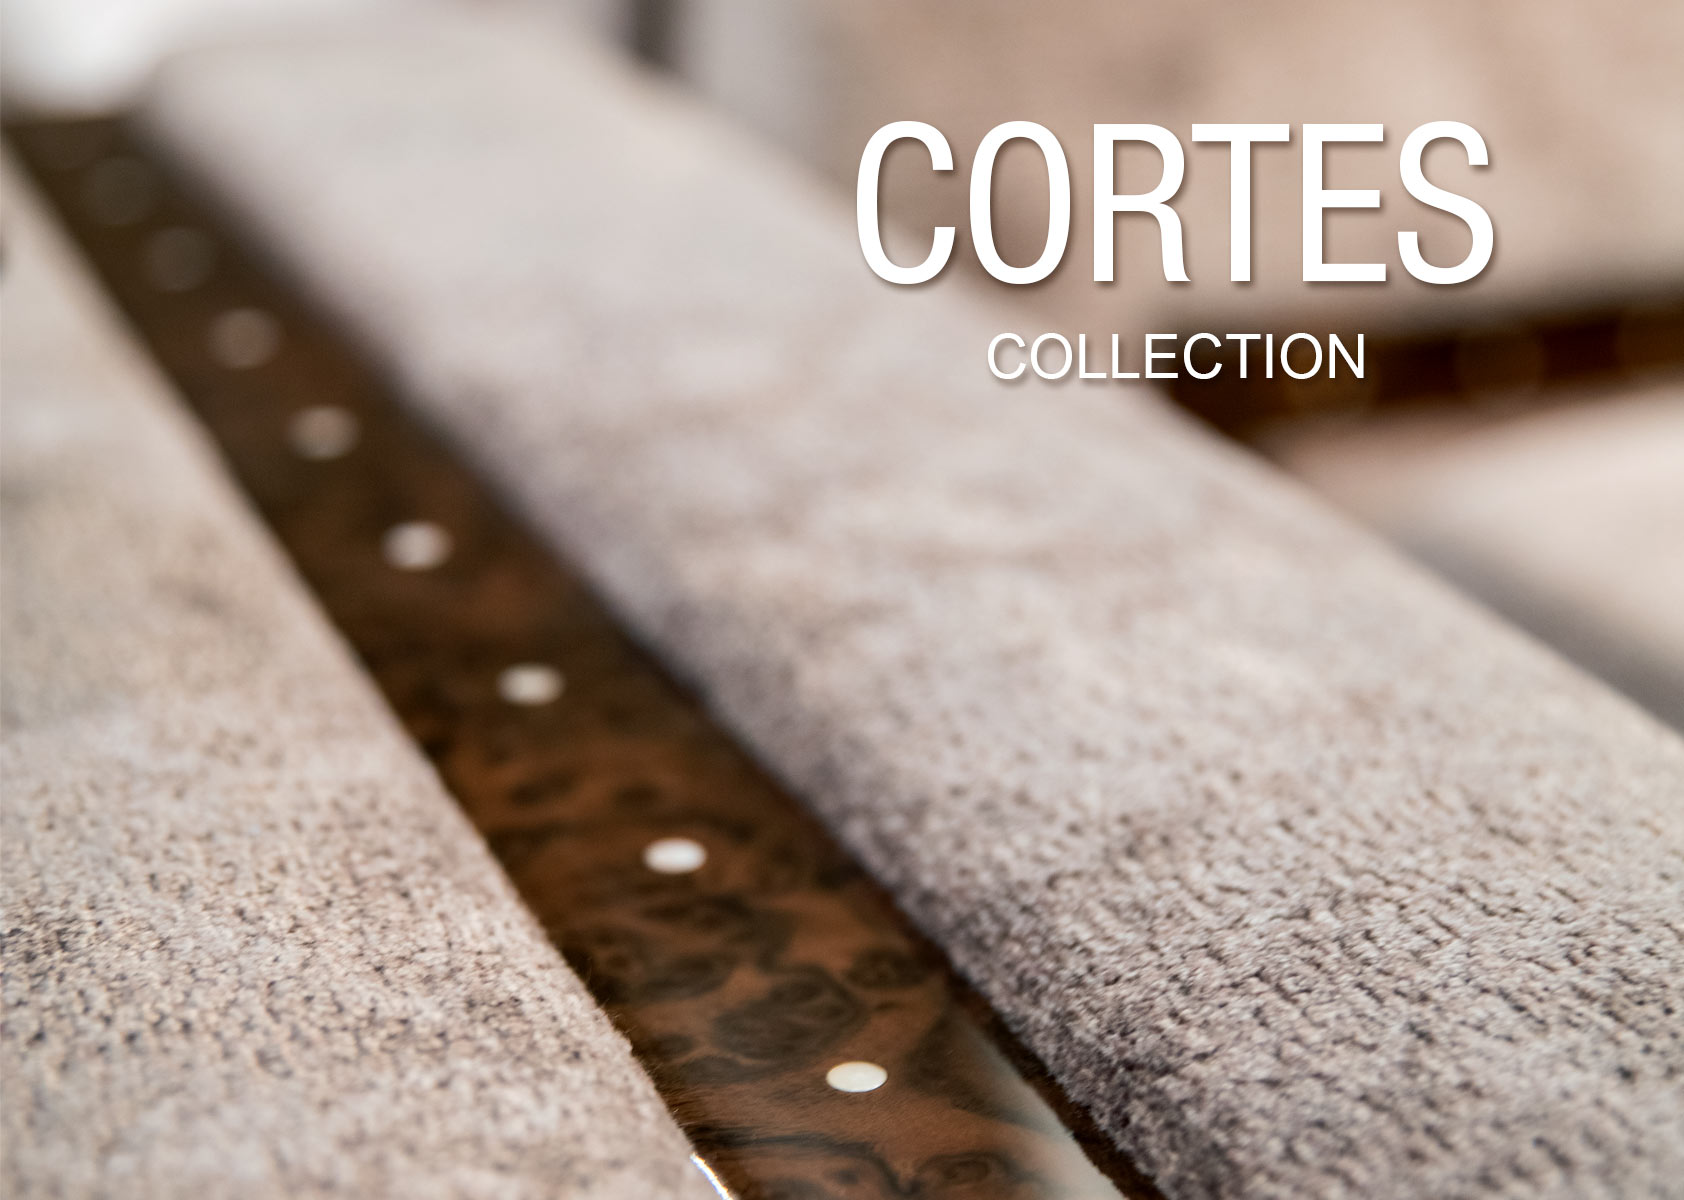  CORTES COLLECTION